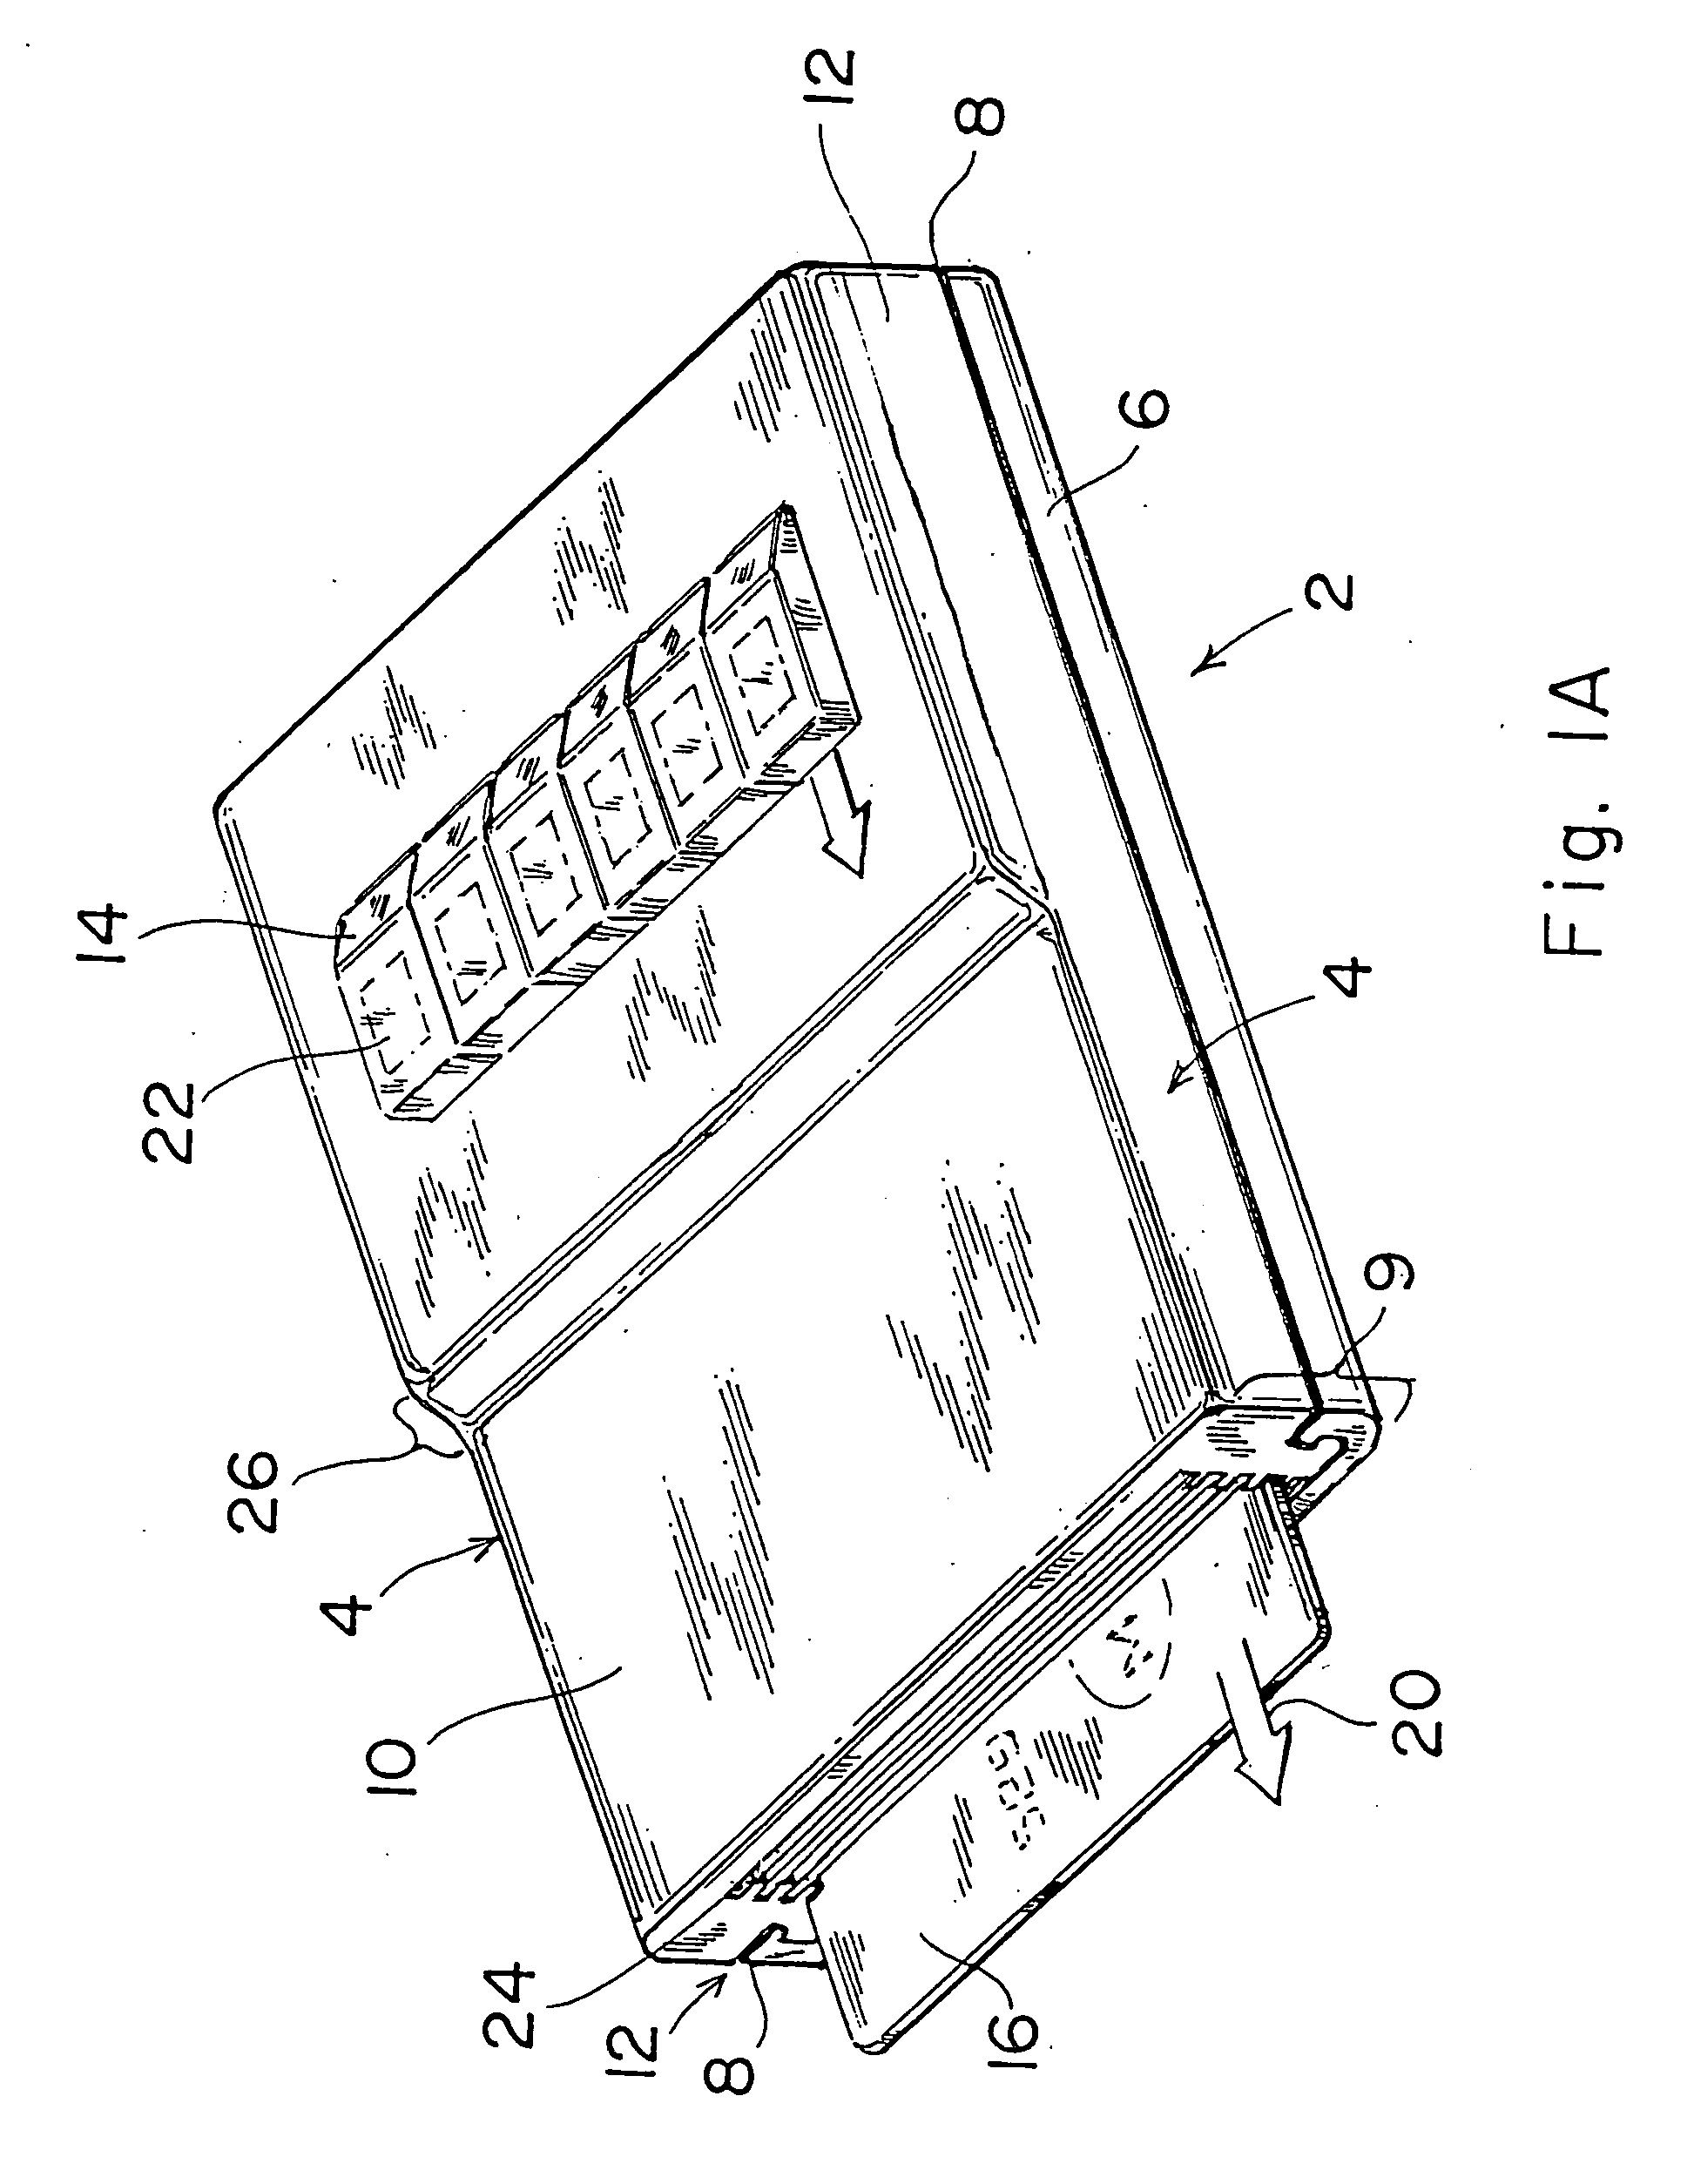 High-capacity card holder and ejector